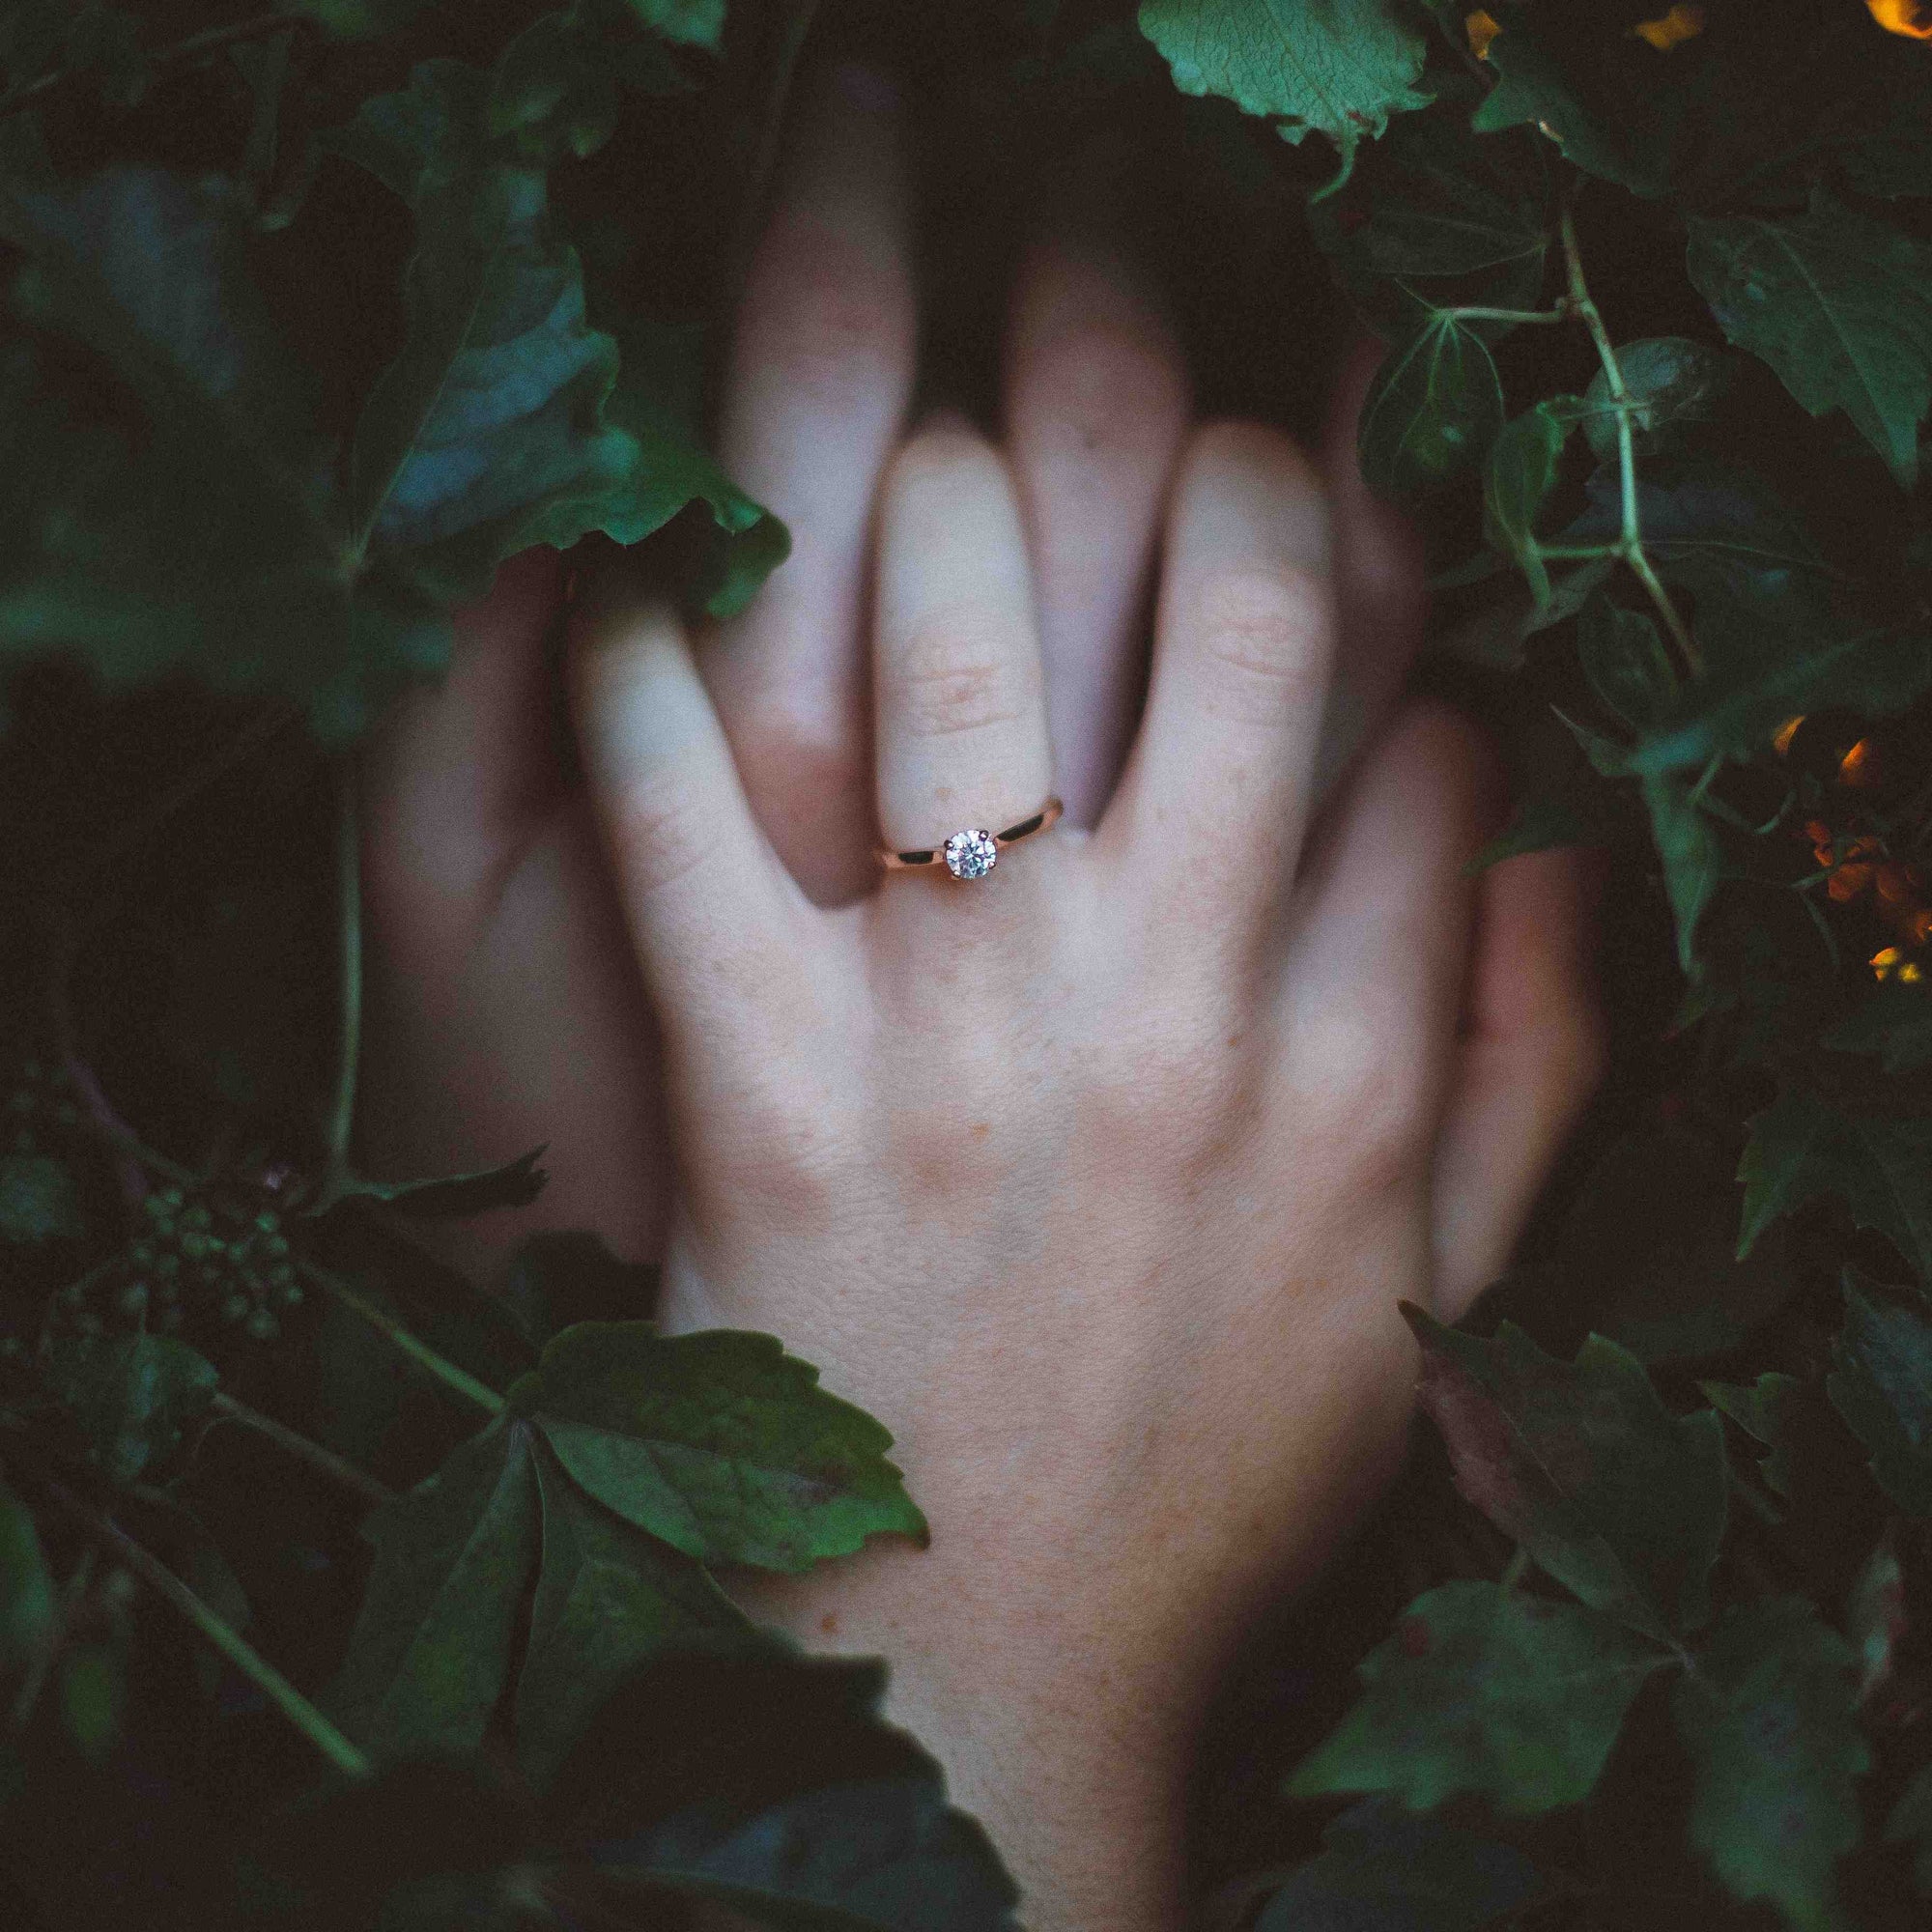 Why do we have Engagement Rings?